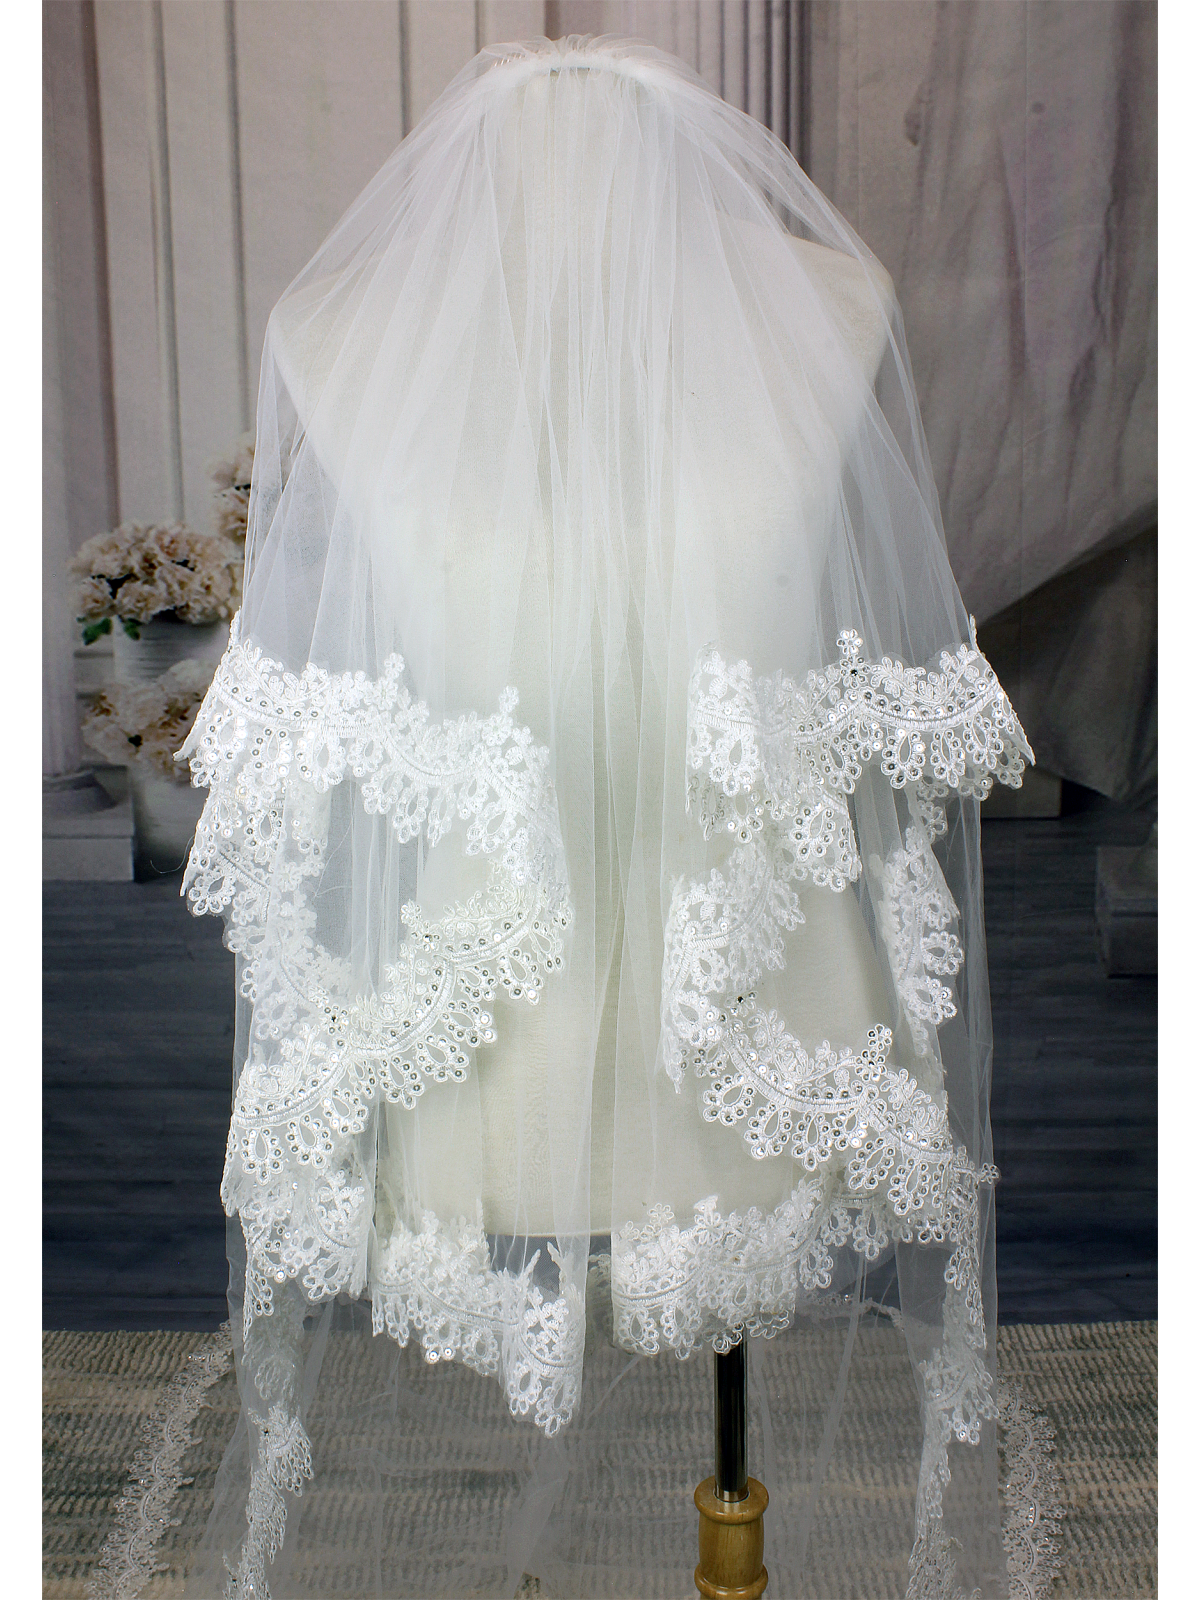 Long Veil - Long Veil with sequined embroidery lace - 110" - VL-V1067-110IV